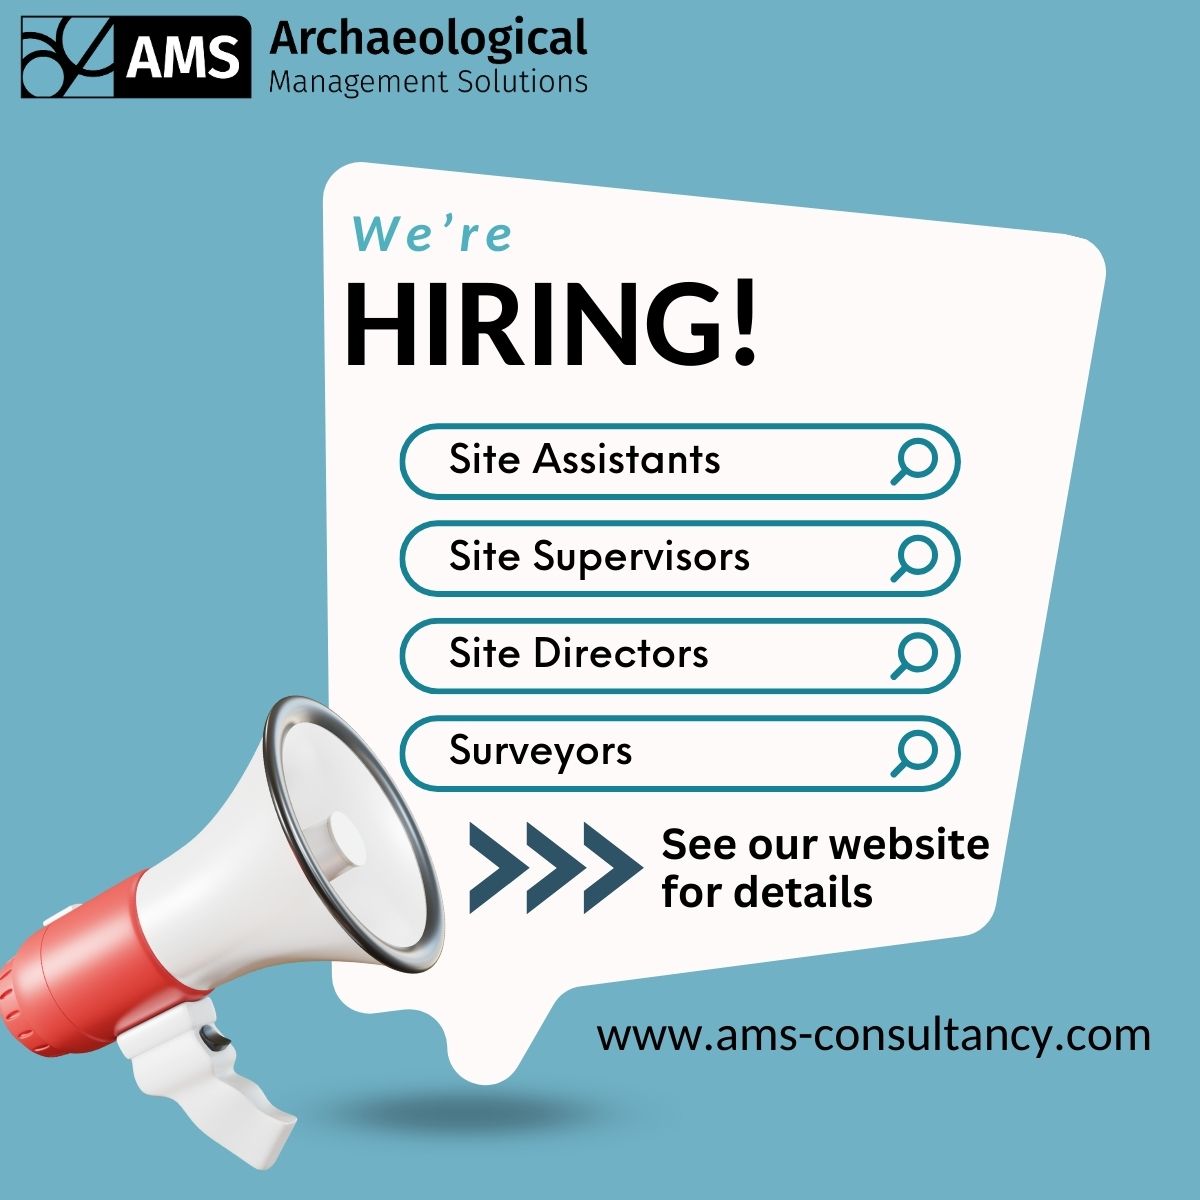 👉 Please see the AMS website for job description details and how to apply: bit.ly/WorkWithAMS #HiringAlert #Irishjobs #archaeologists